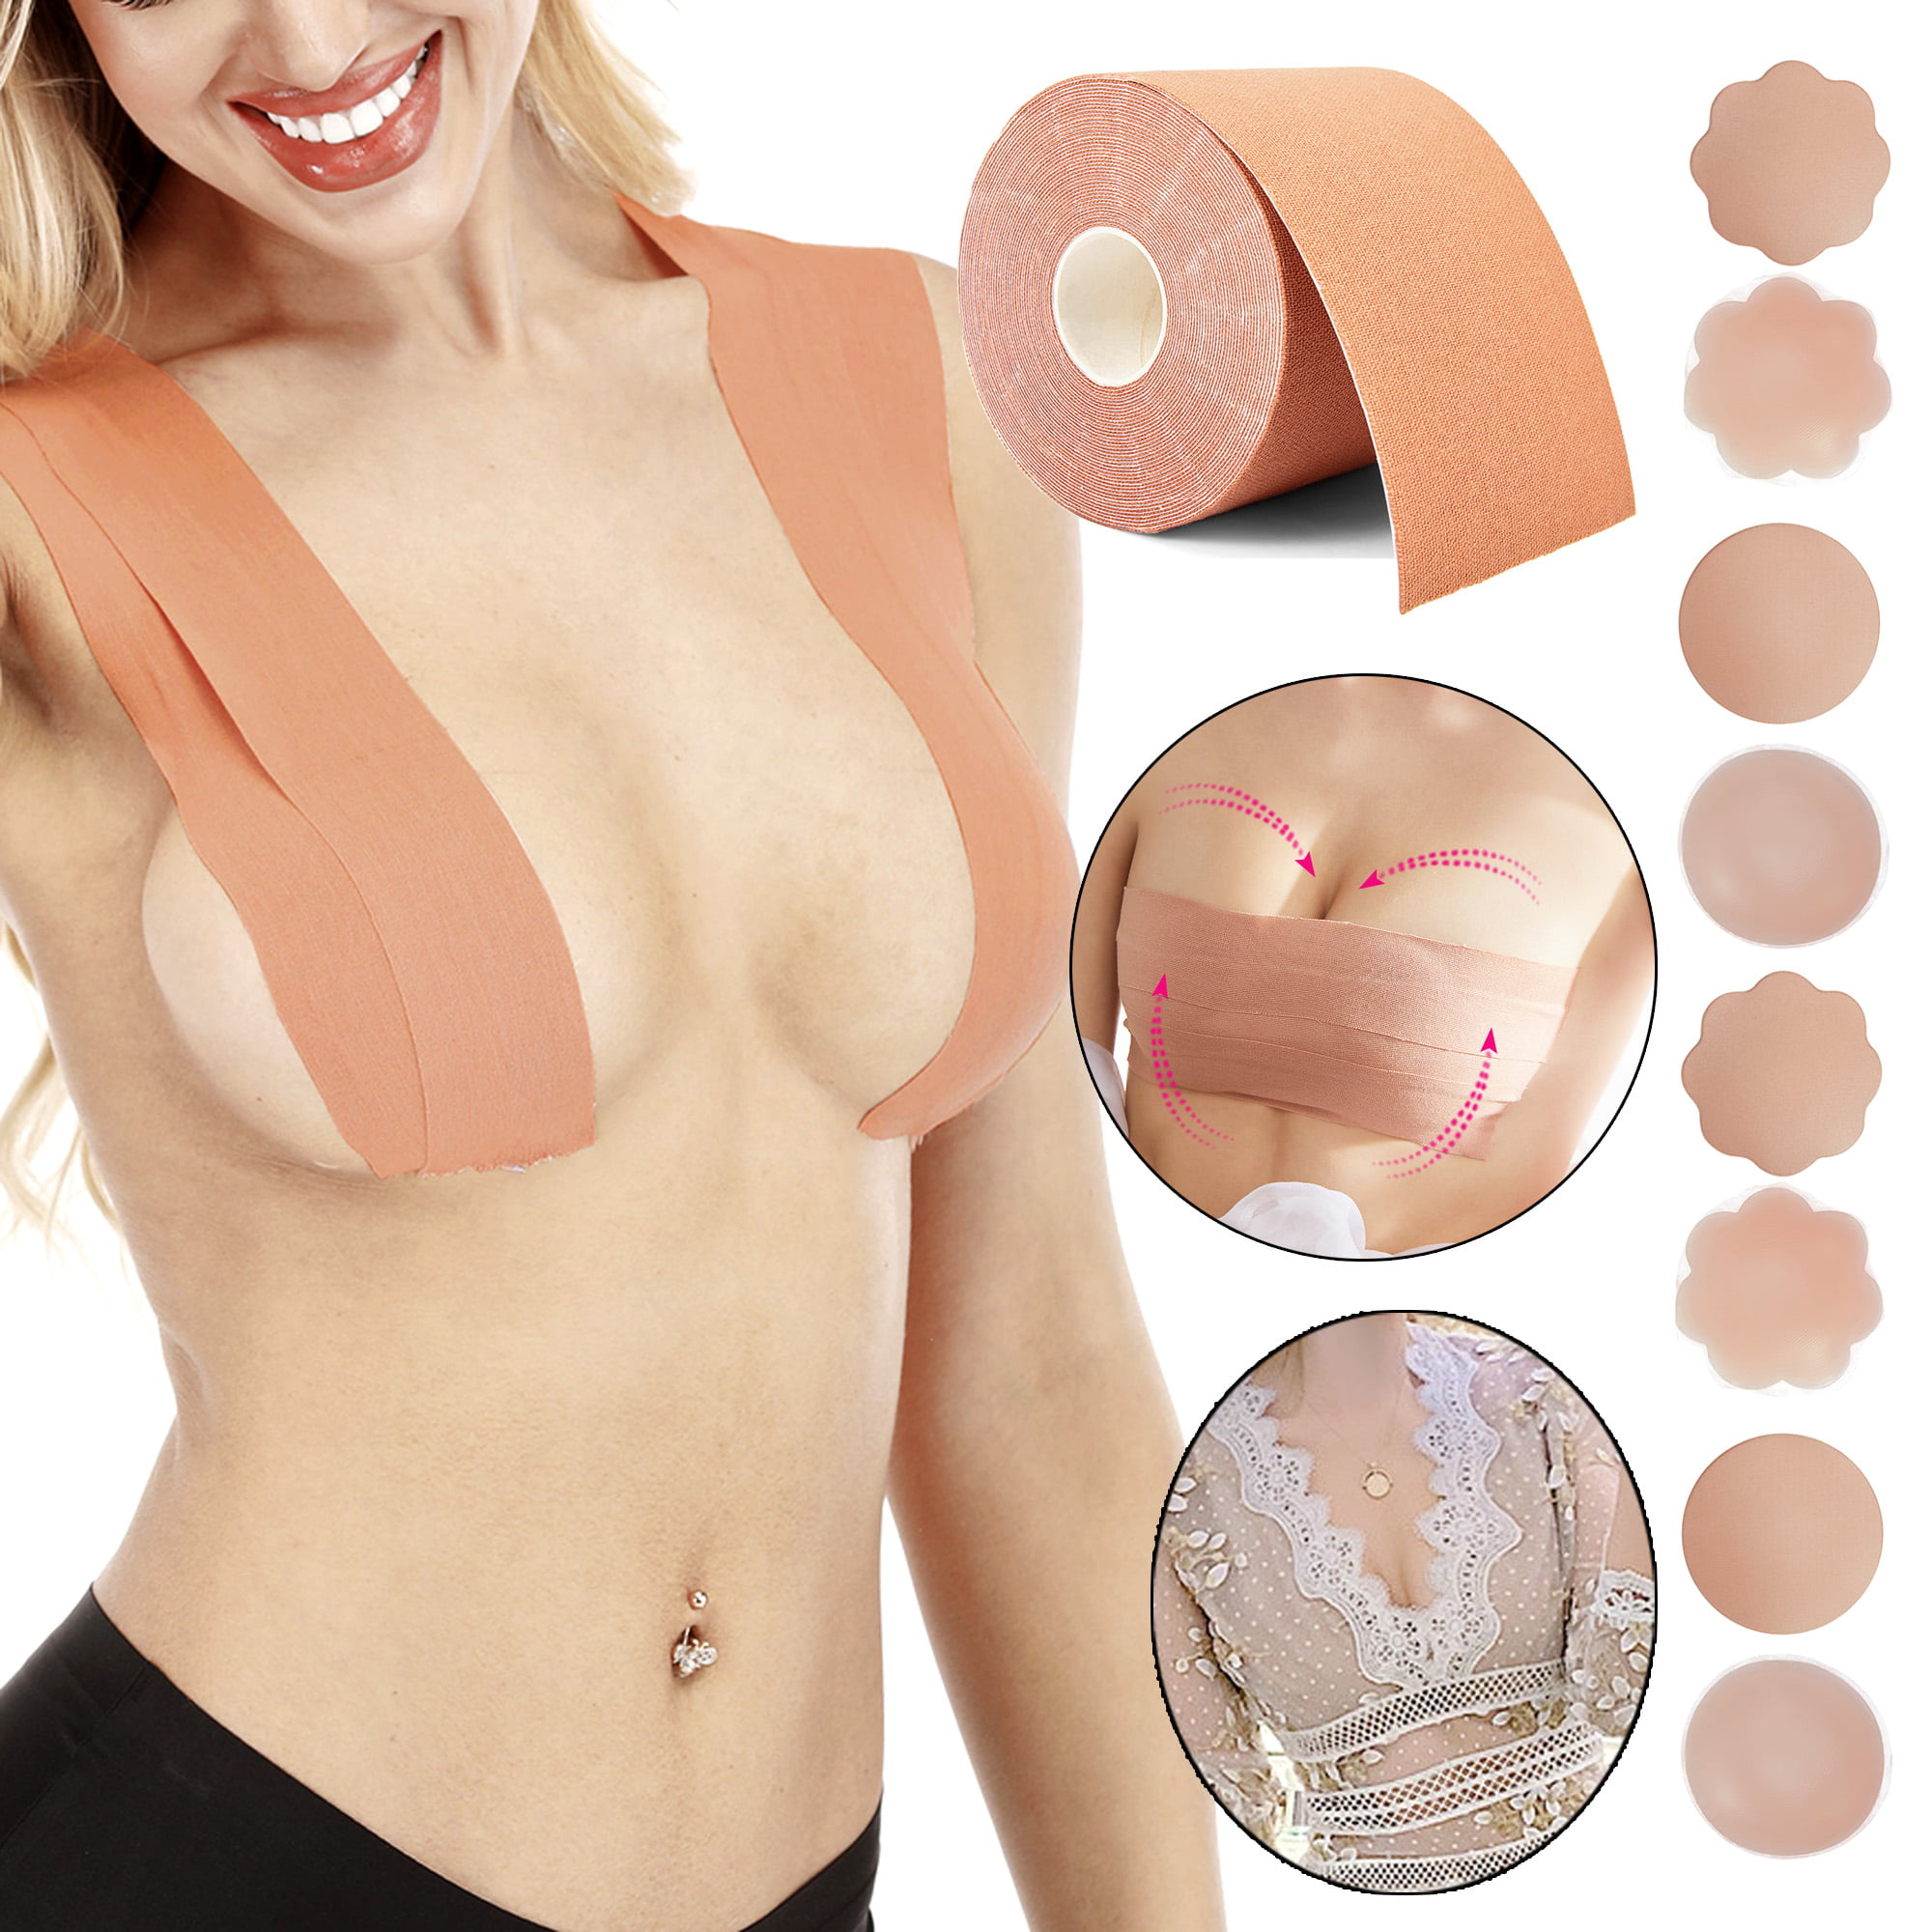 SAYFUT Body Tape and 8 Pcs Petal Backless Nipple Cover Set, Breathable  Breast Lift Tape Medical Grade Athletic Tape with Silicone Breast Petals